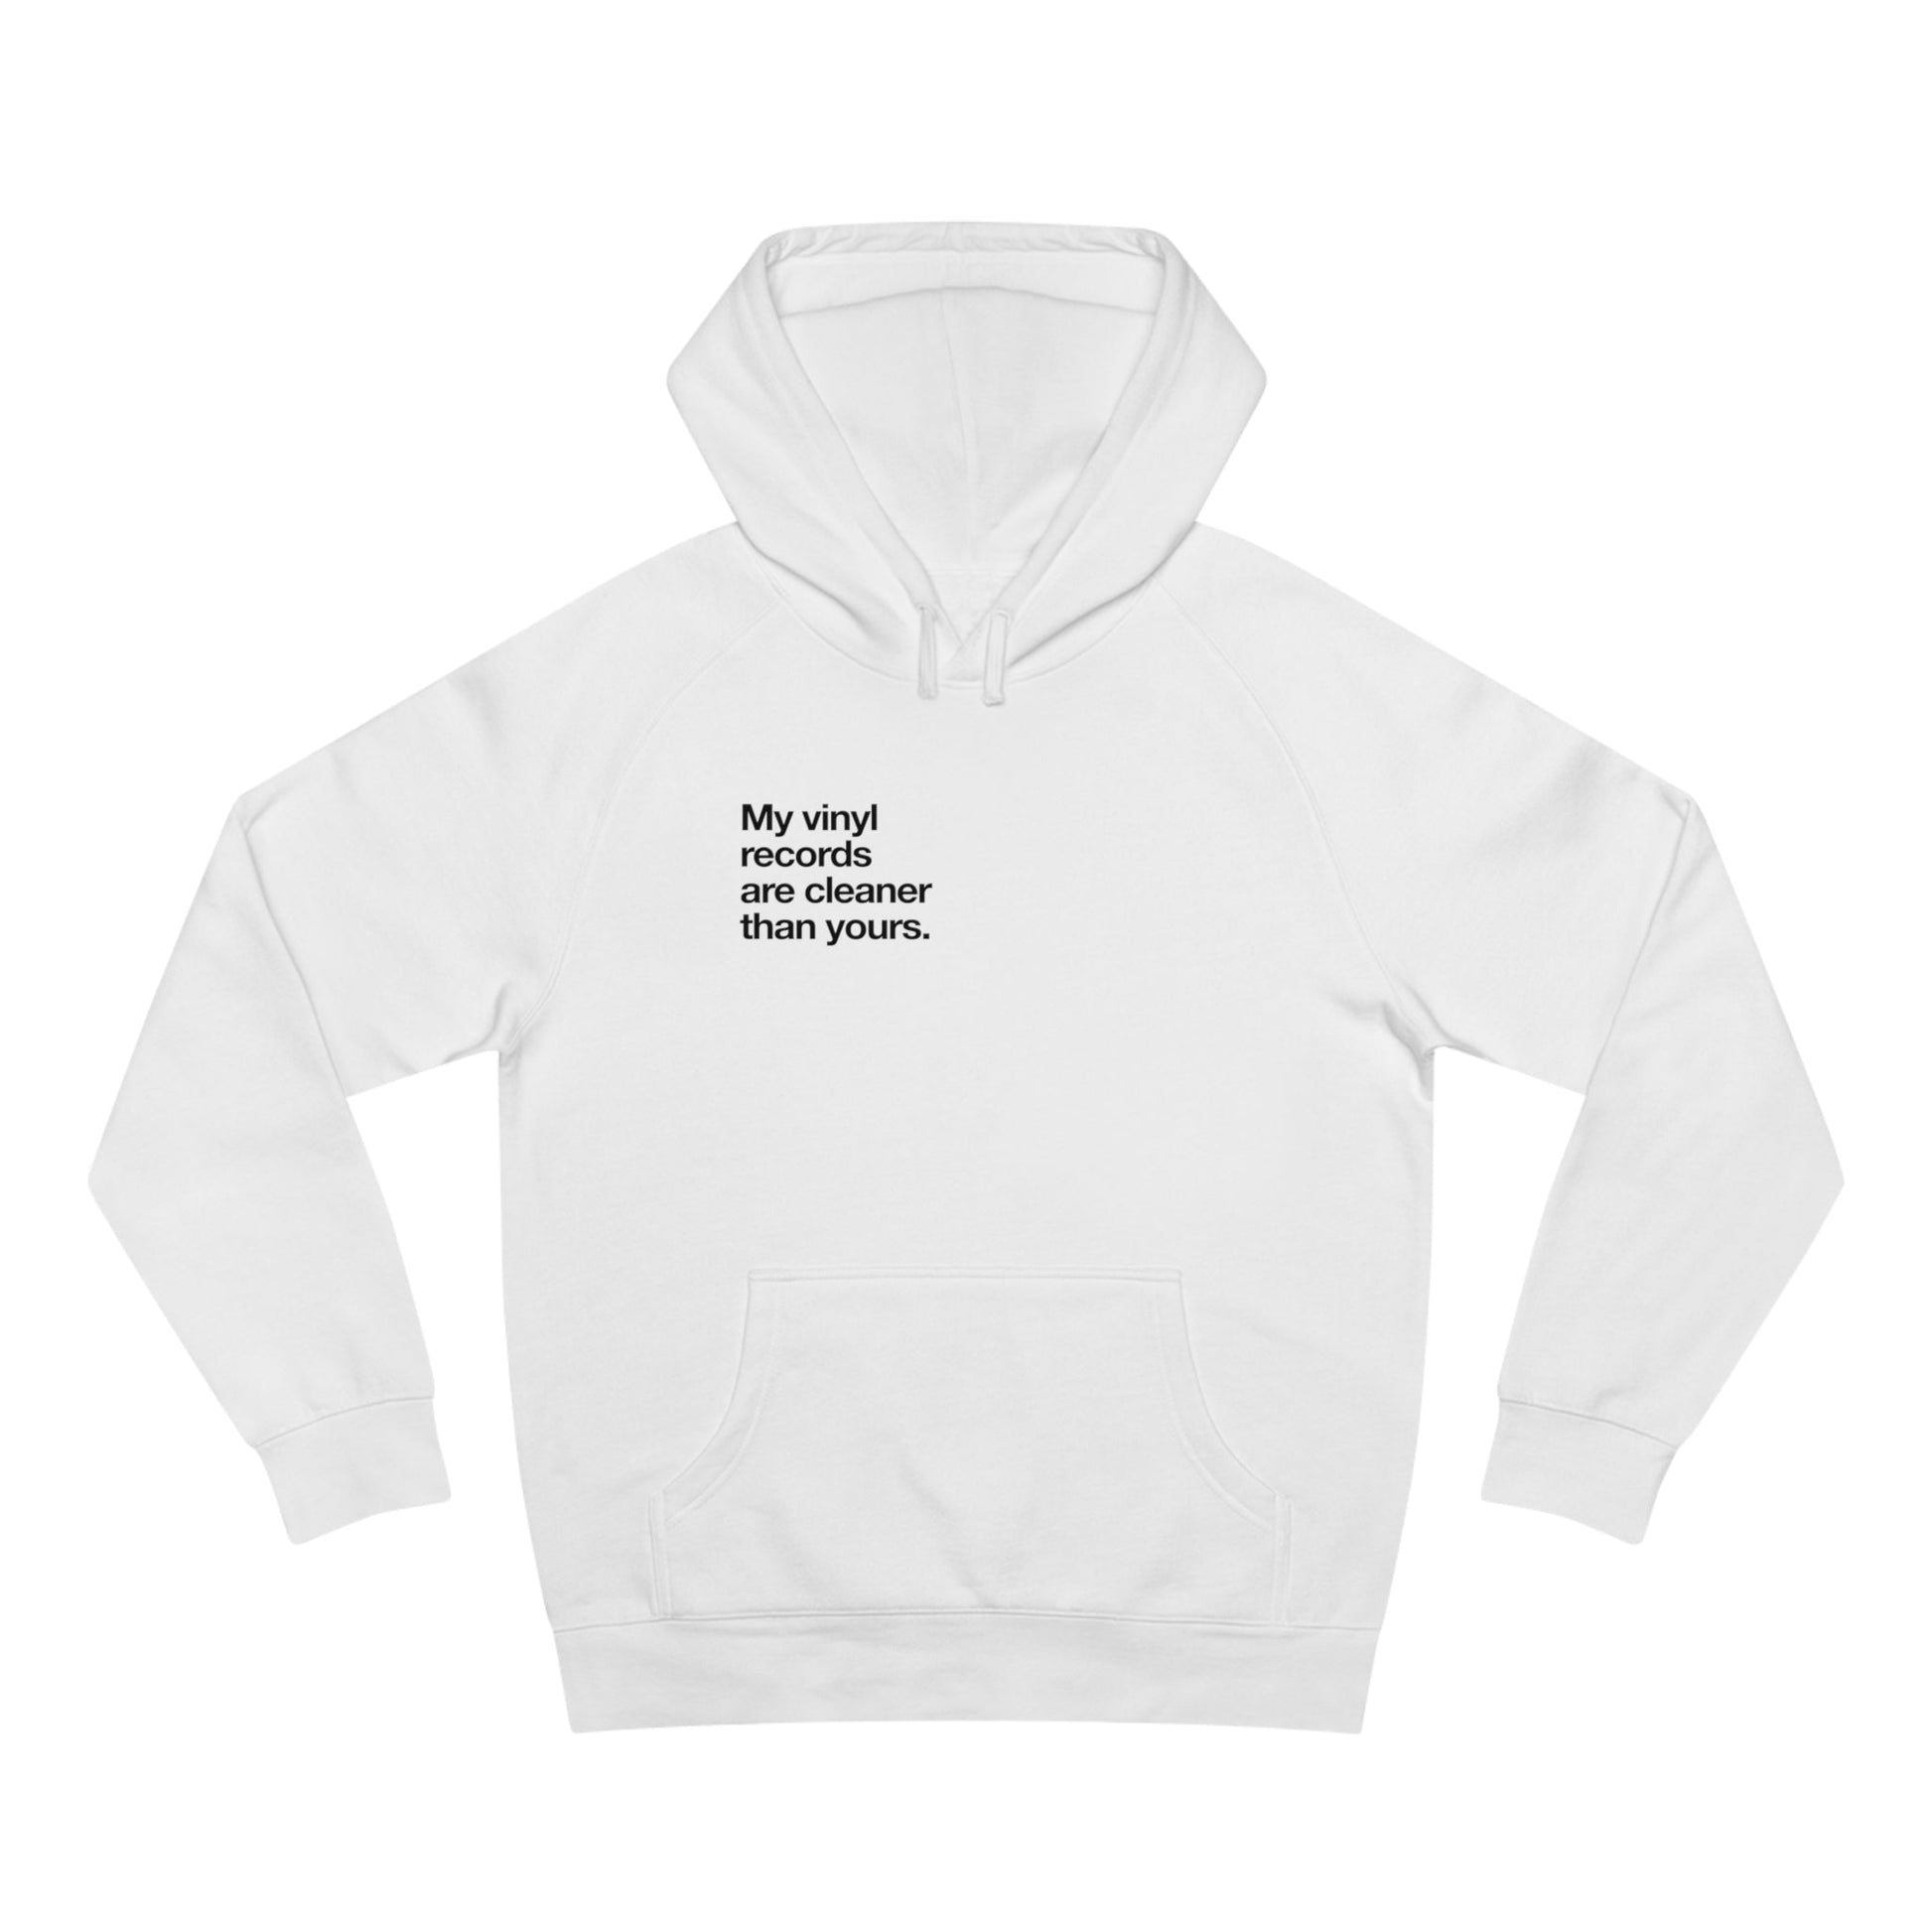 My vinyl records are cleaner than yours hoodie - Pure Neo Shop